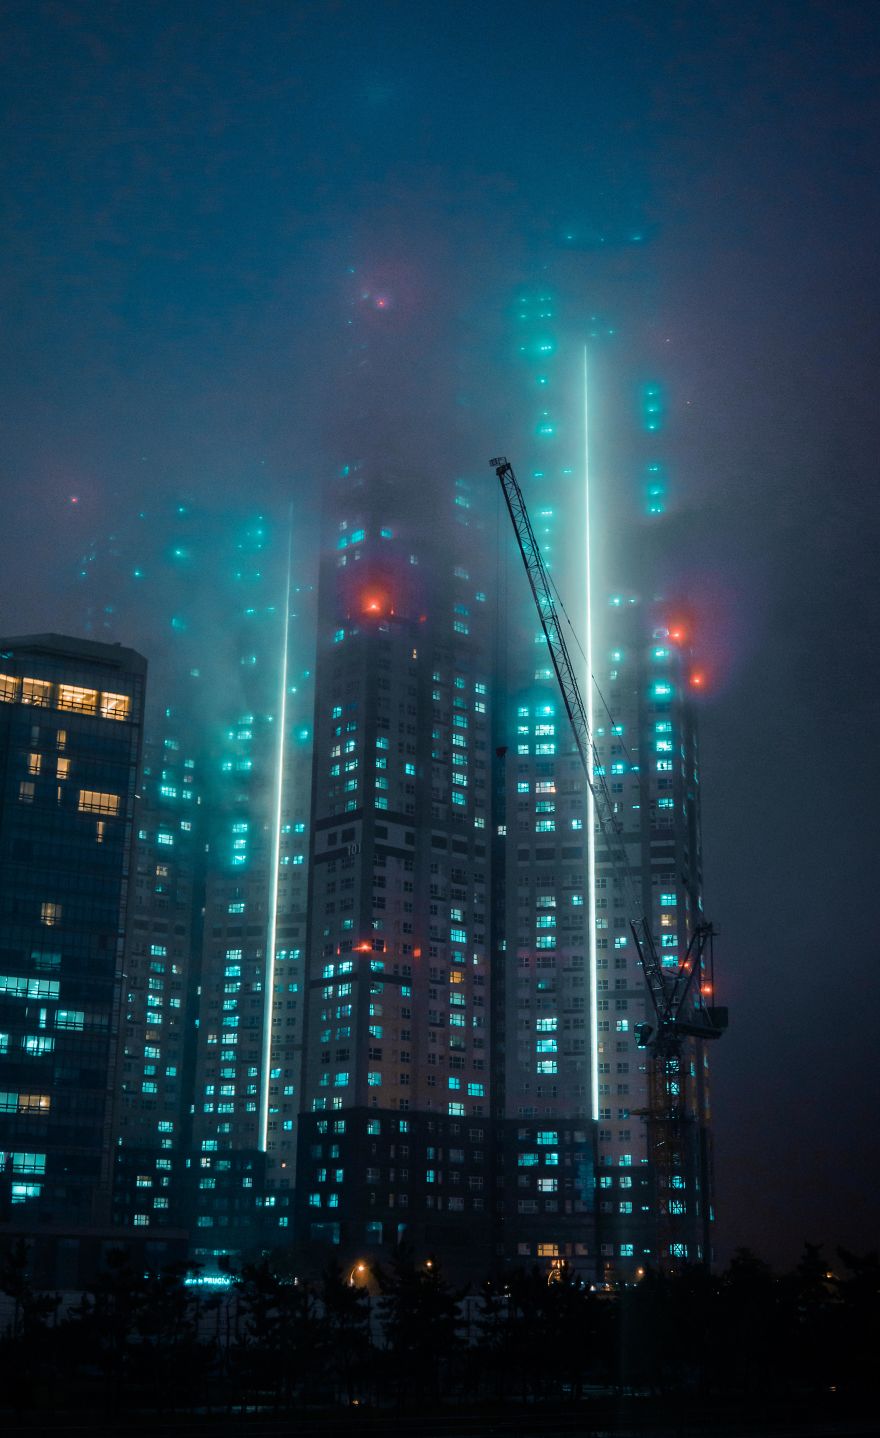  from time fog made city look like 